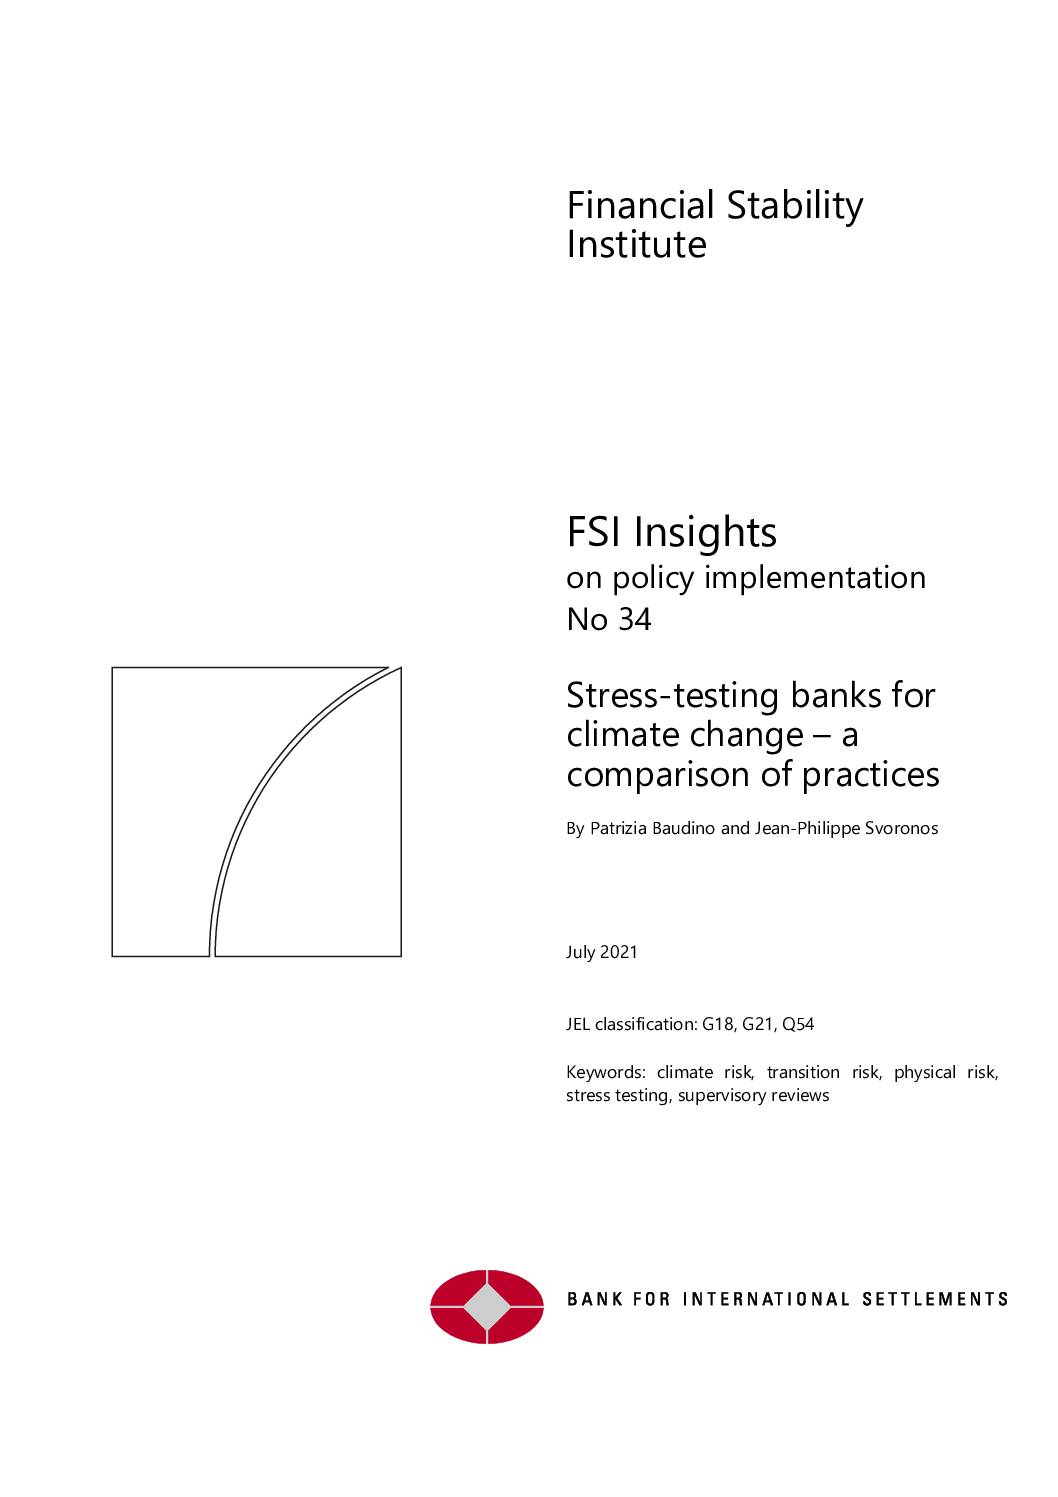 Financial Stability Institute Insight on Policy Implementation No 34: Stress-Testing Banks for Climate Change: A Comparison of Practices